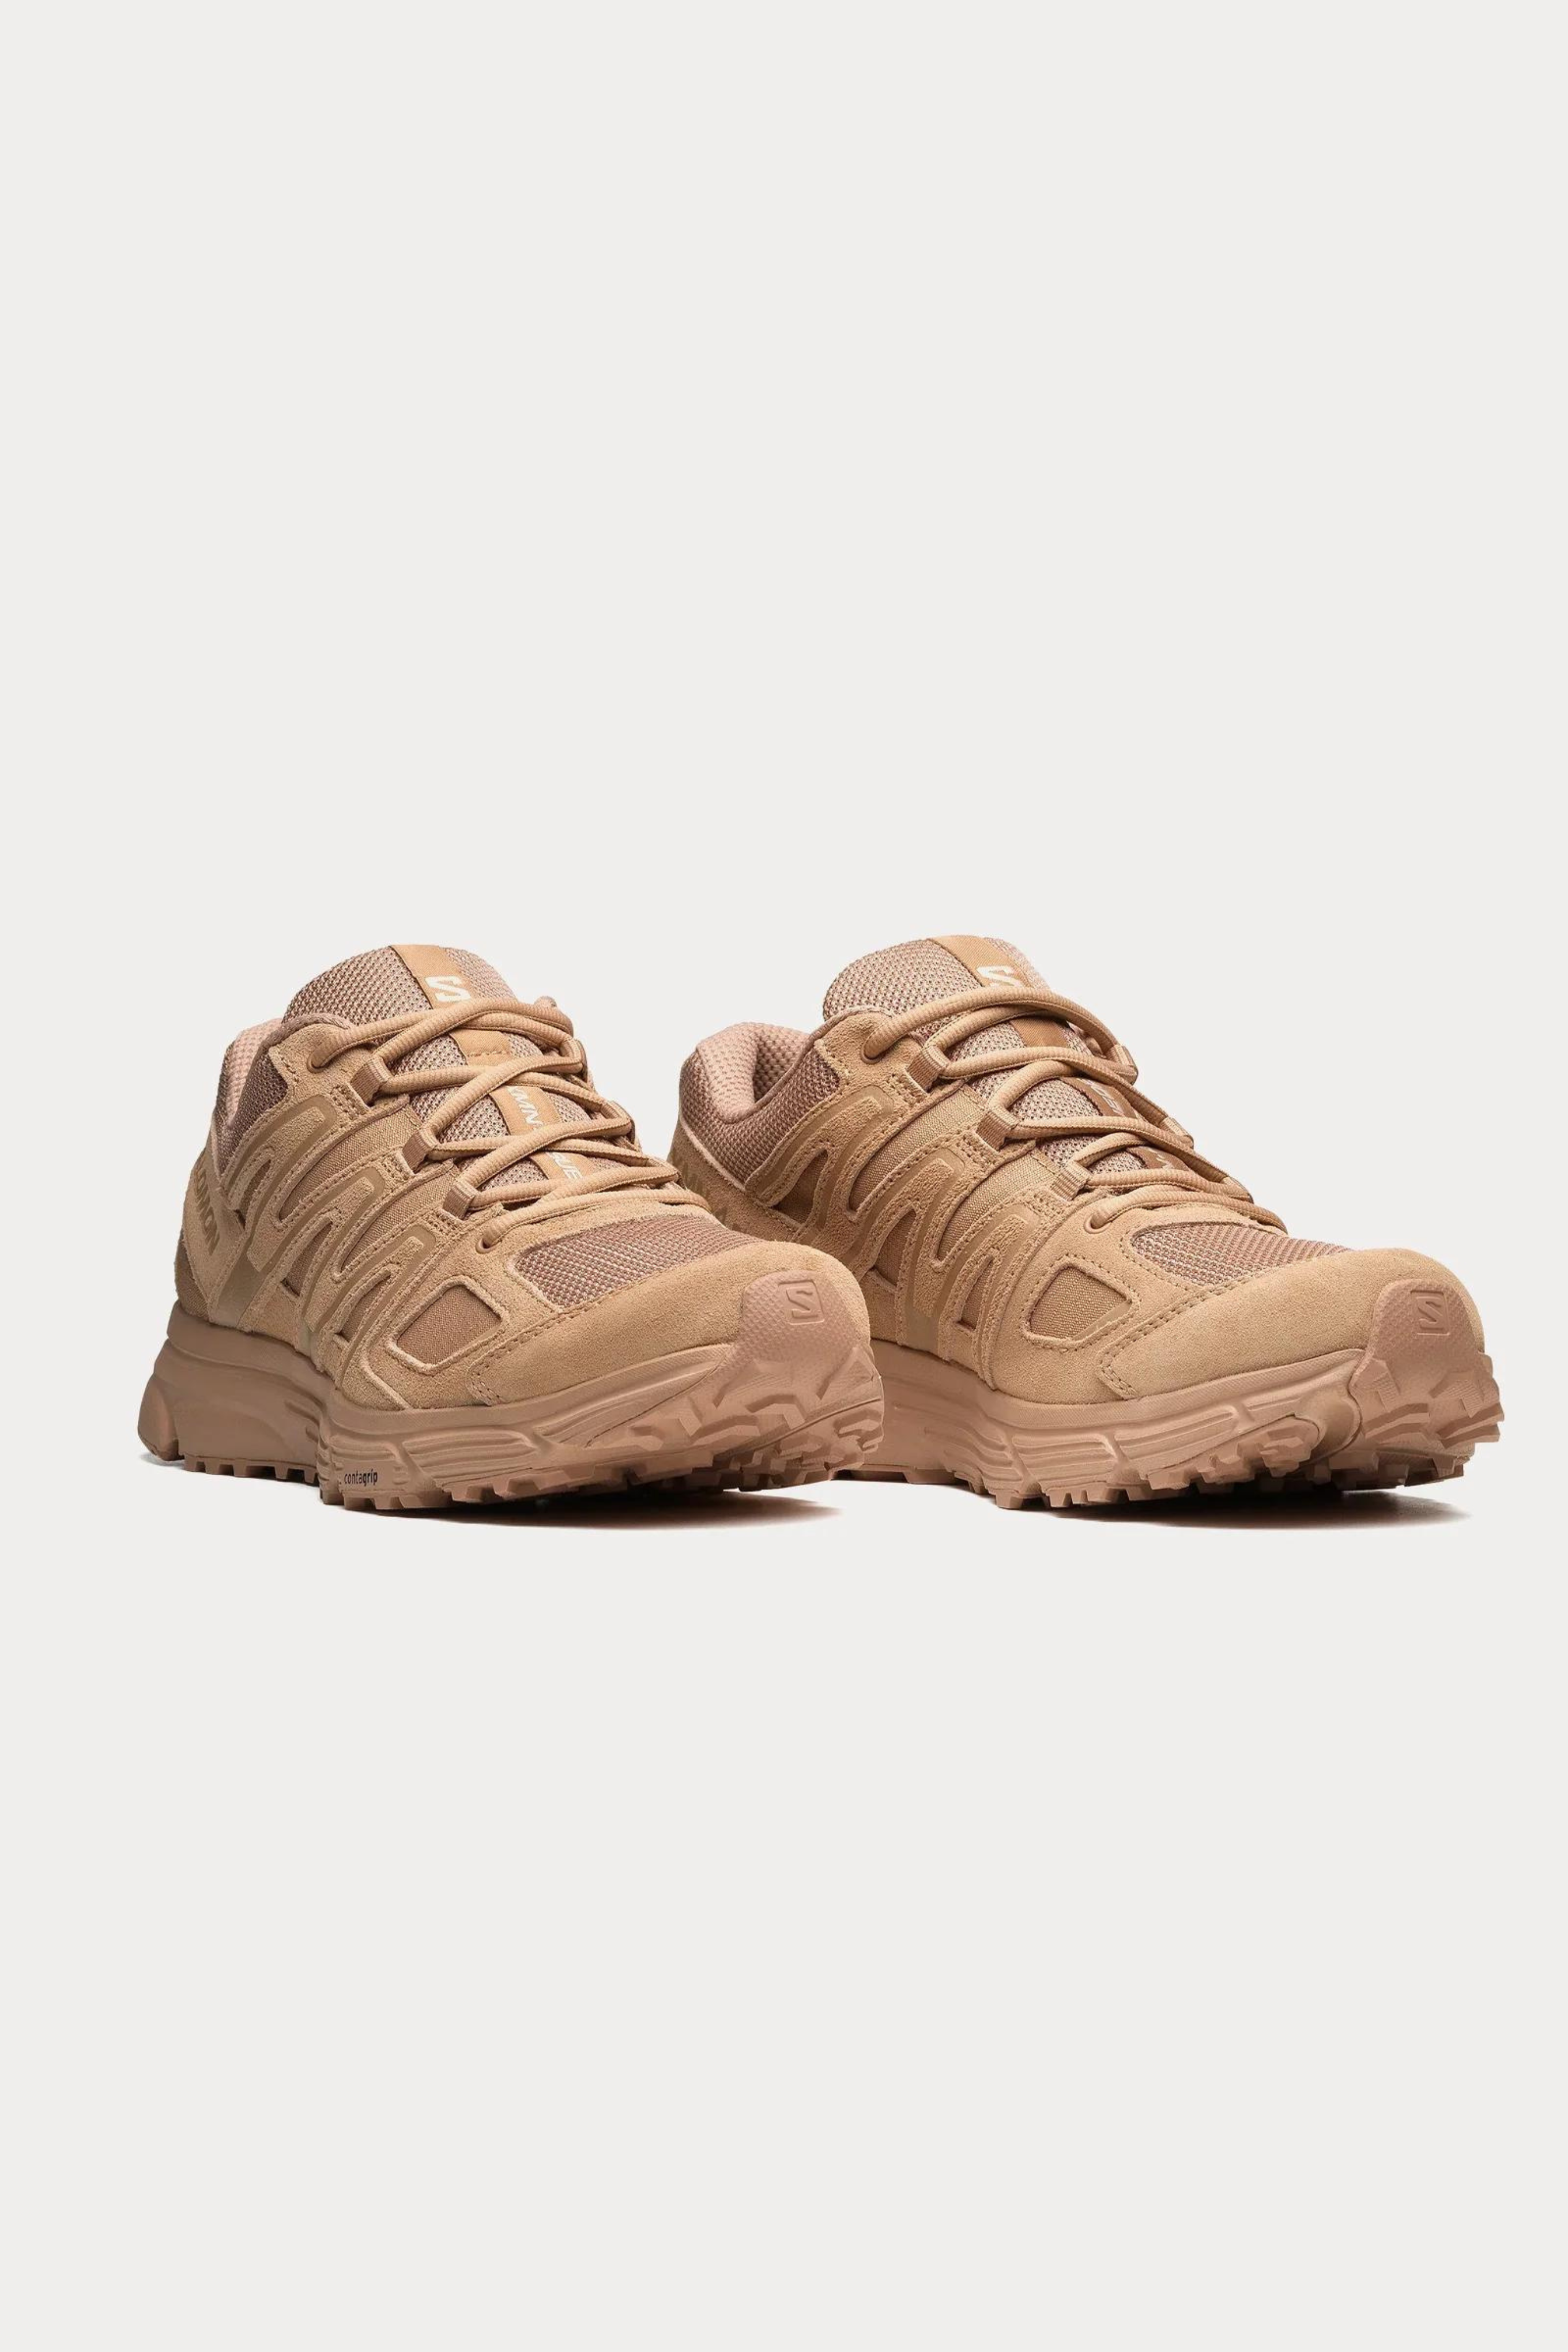 X-MISSION 4 SUEDE SNEAKER - NATURAL/NATURAL/NATURAL